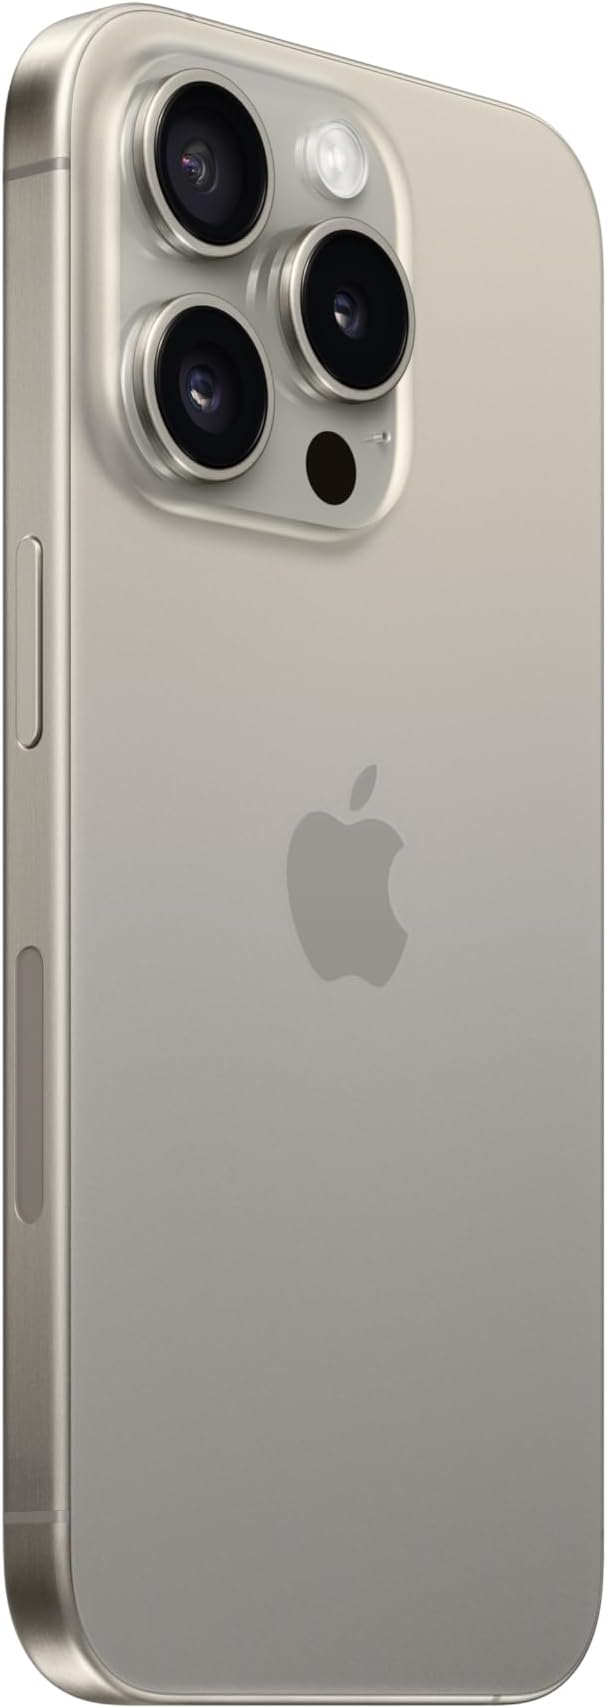 Iphone 13 Pro Max 512gb Dual Sim In Zimbabwe From Continental Technologies